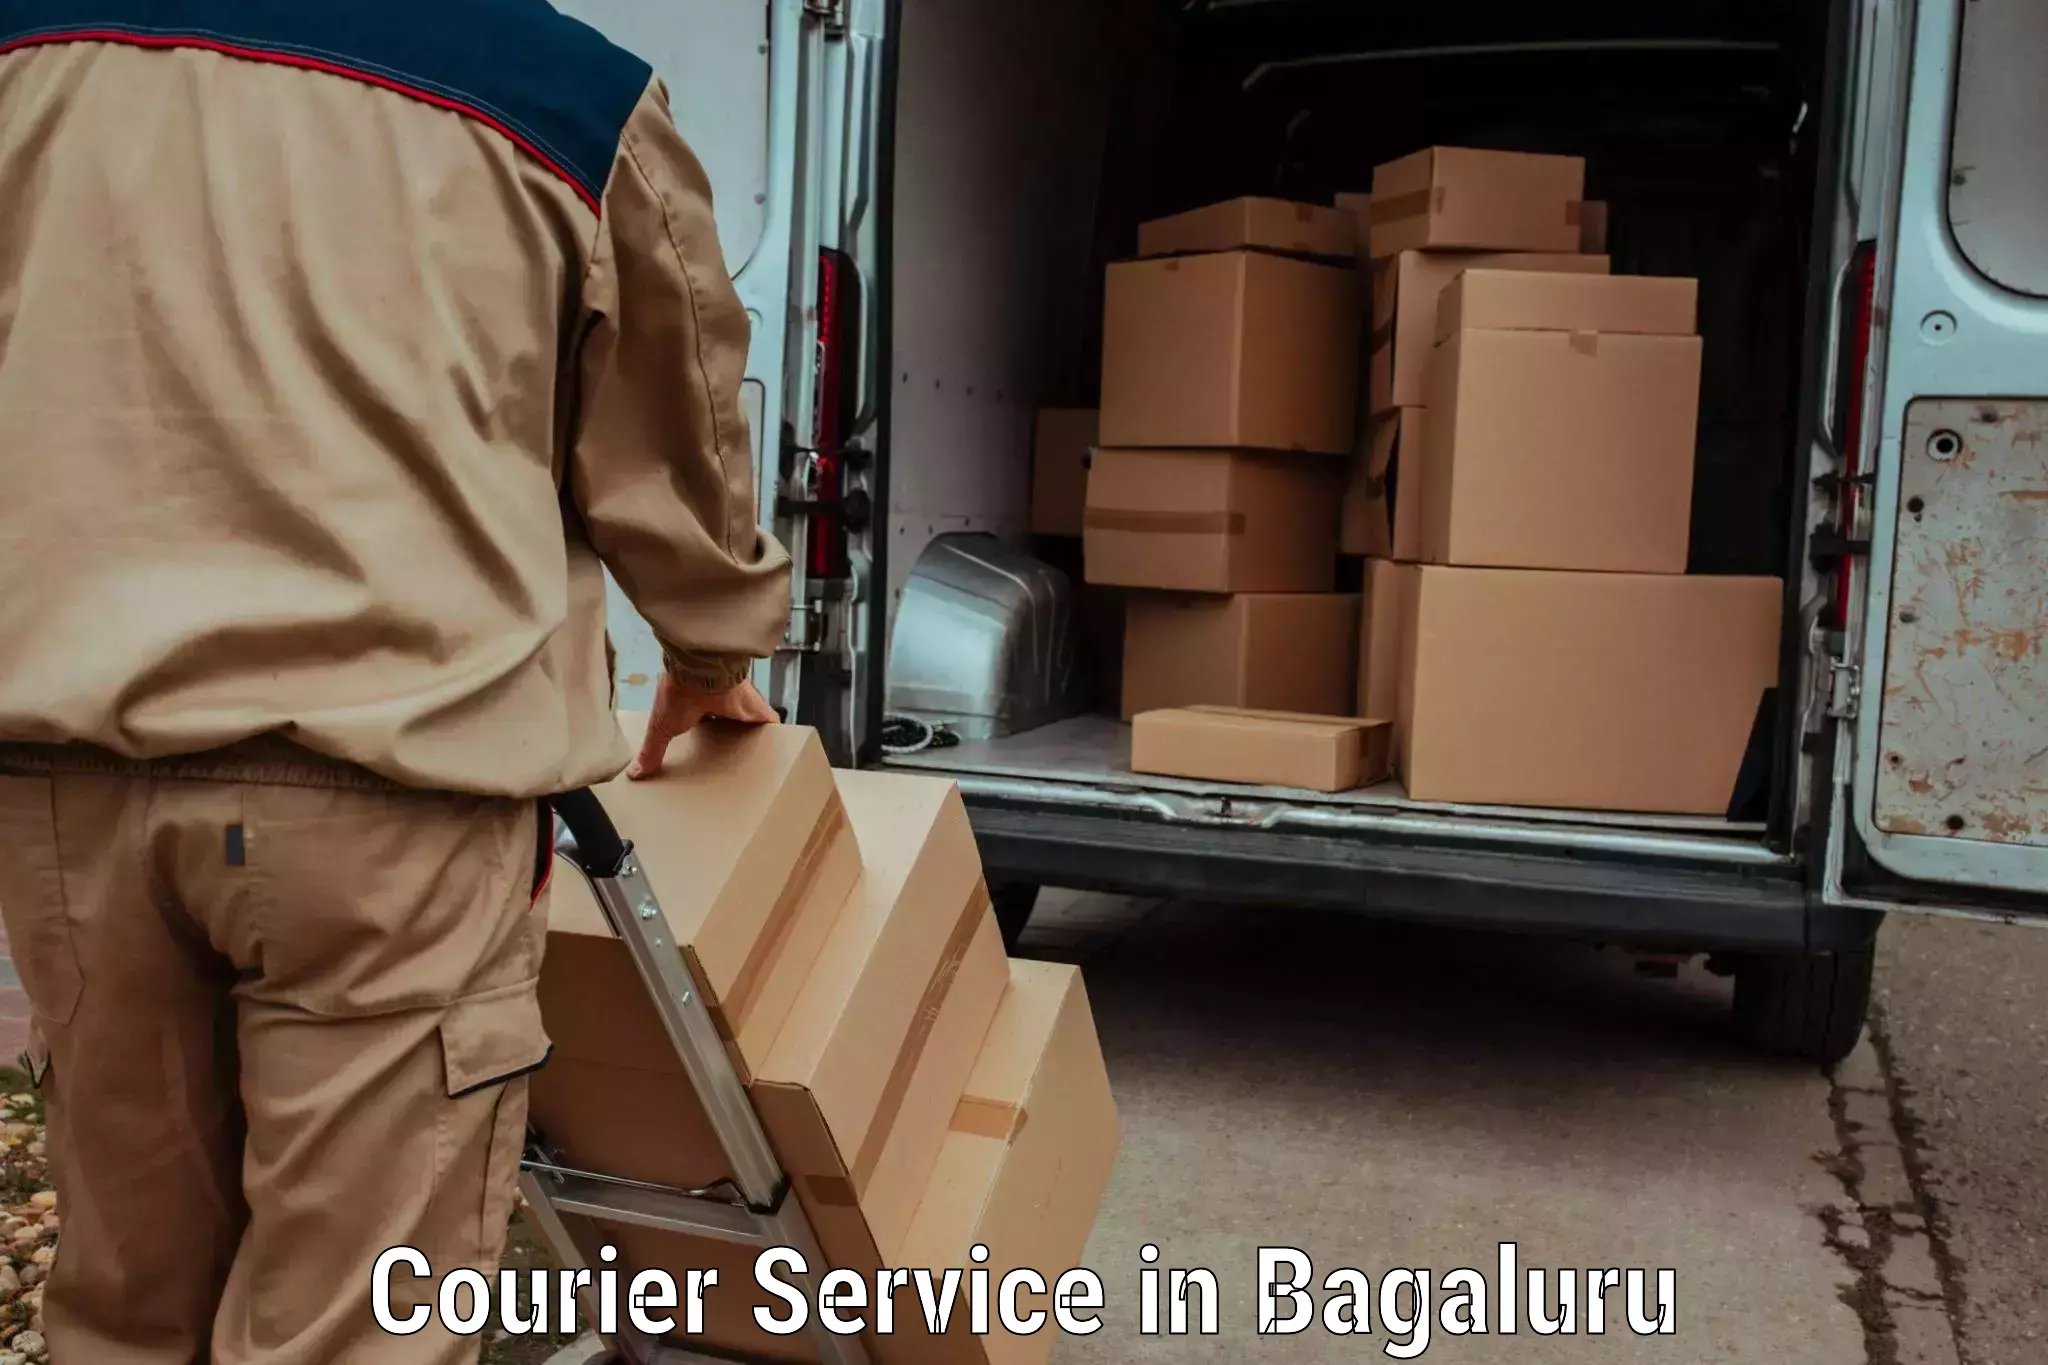 Fast-track shipping solutions in Bagaluru